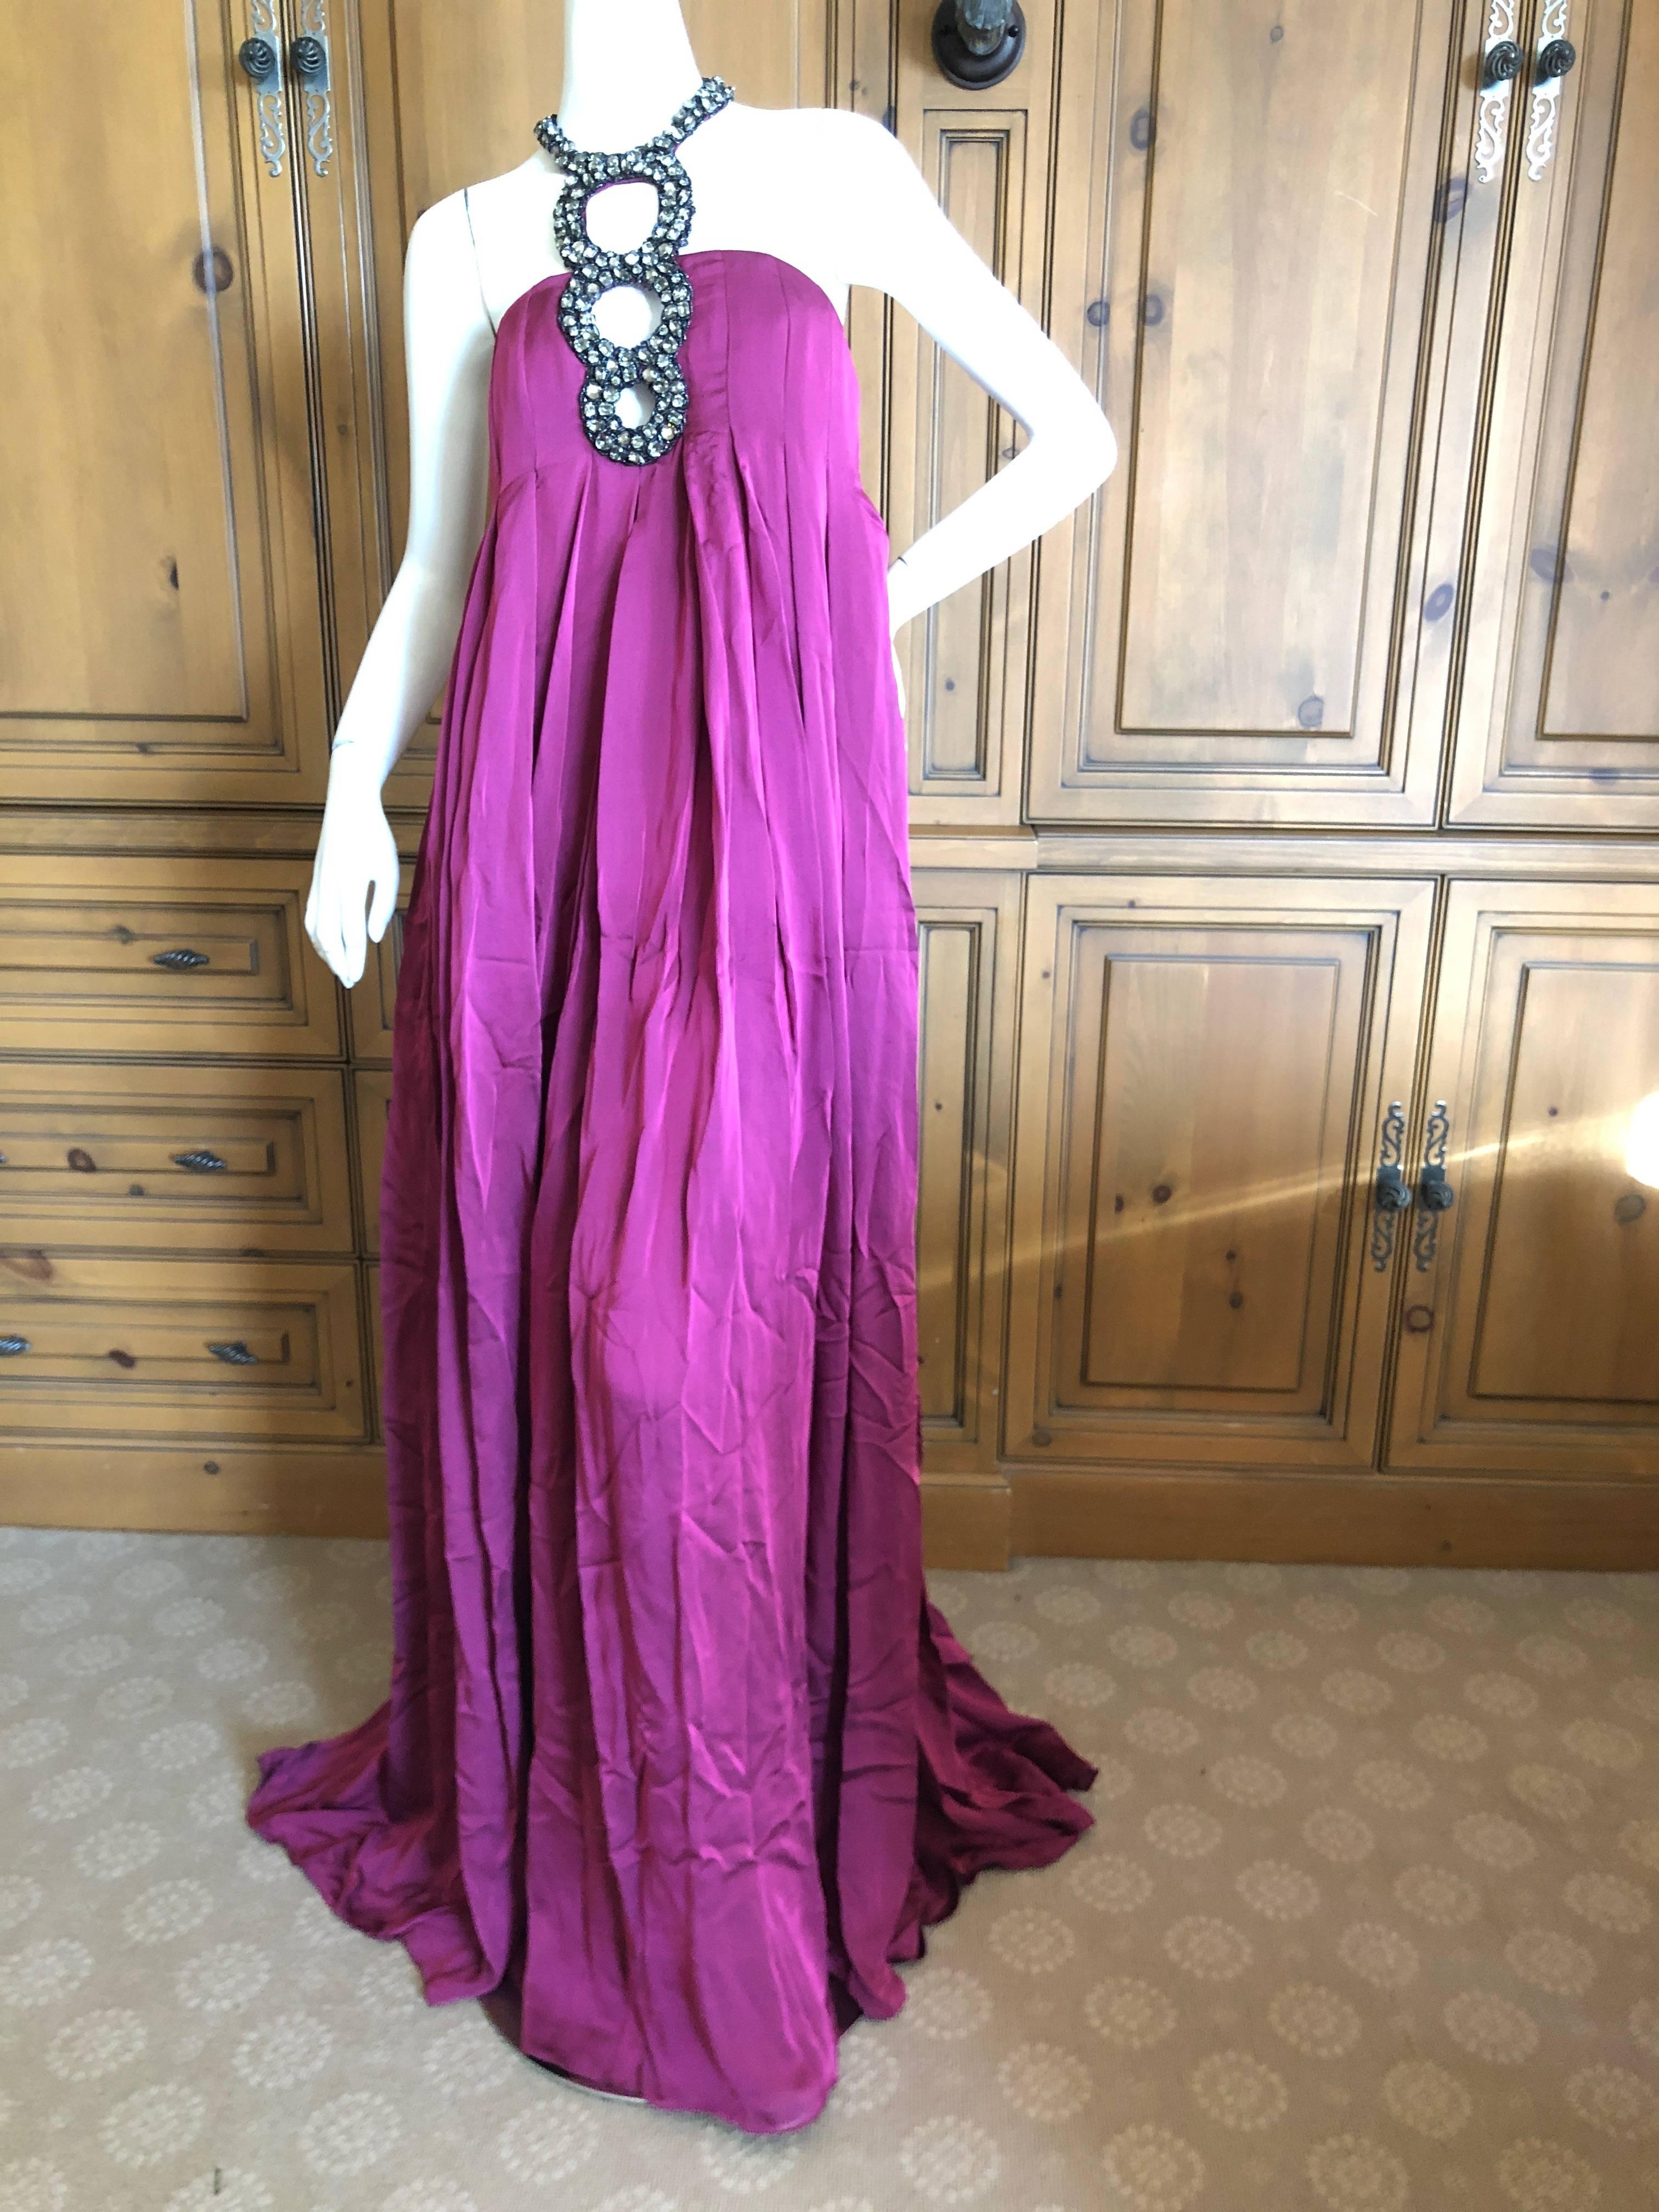 Azzaro Iconic Keyhole Backless Dress with Crystal Details.
Store tags still attached
This is such a pretty piece. 
Size 38, seems to run large, please see measurements.
Bust 36